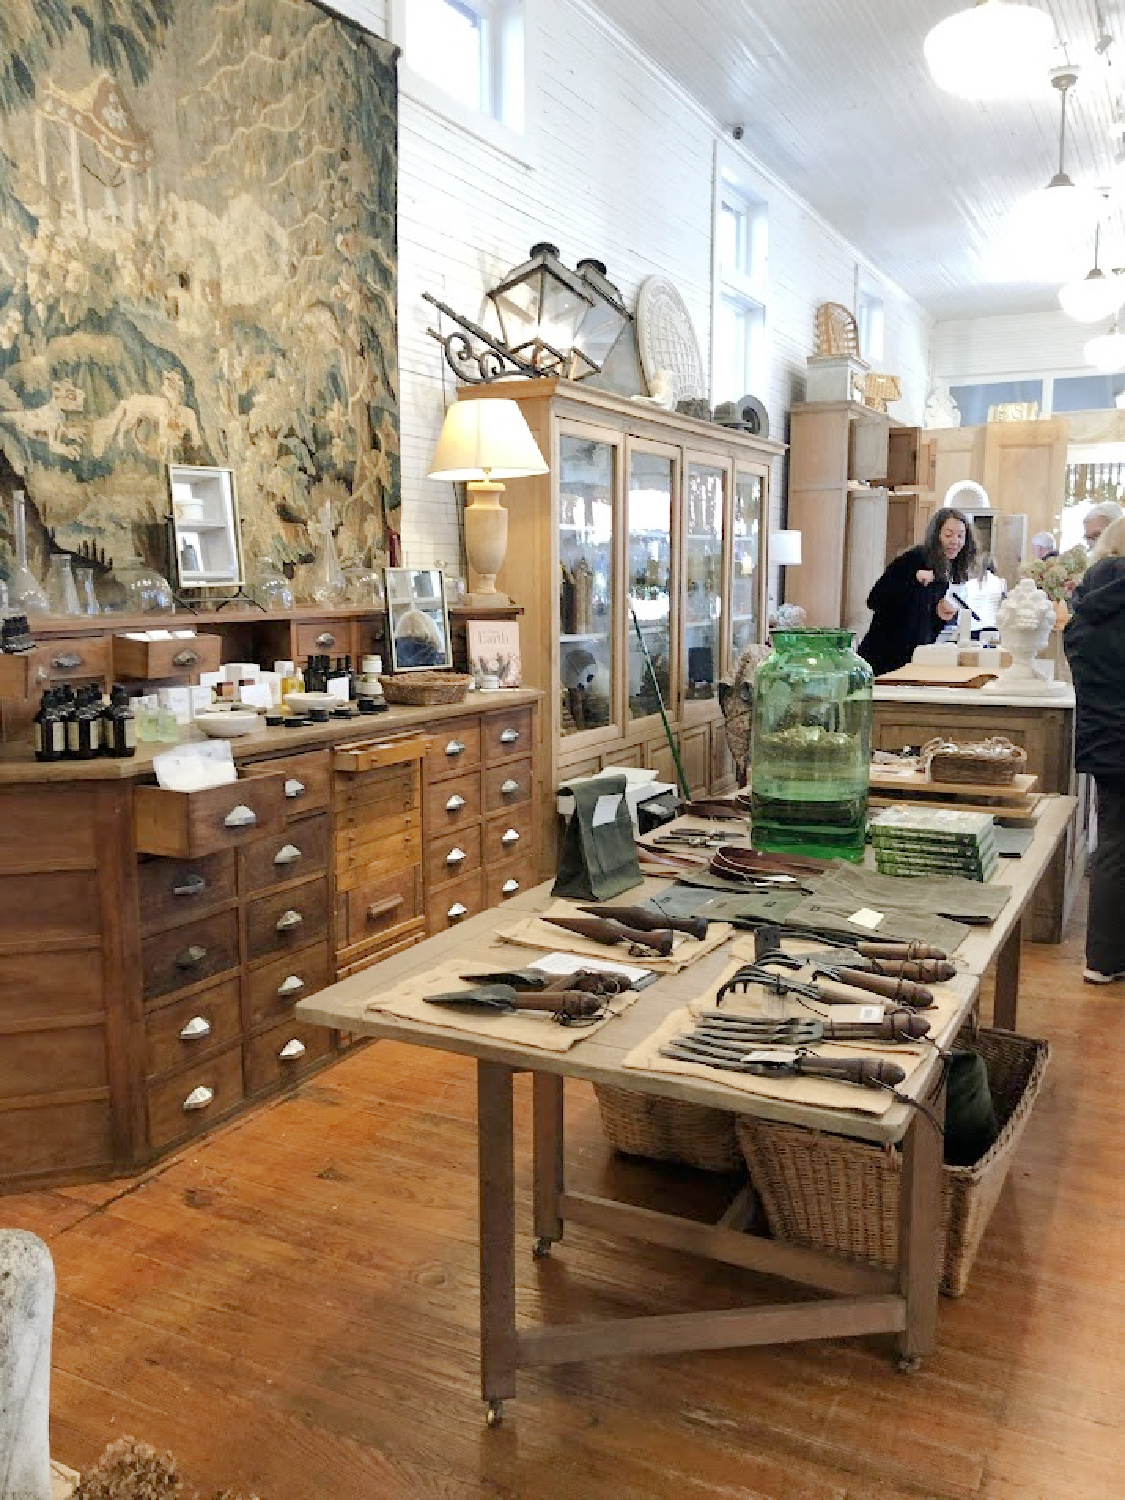 Beautiful European antiques and county homewares at Patina Home & Garden shop near Franklin from Giannettis in Leiper's Fork, TN - Hello Lovely Studio. #patinahome #leipersforktn